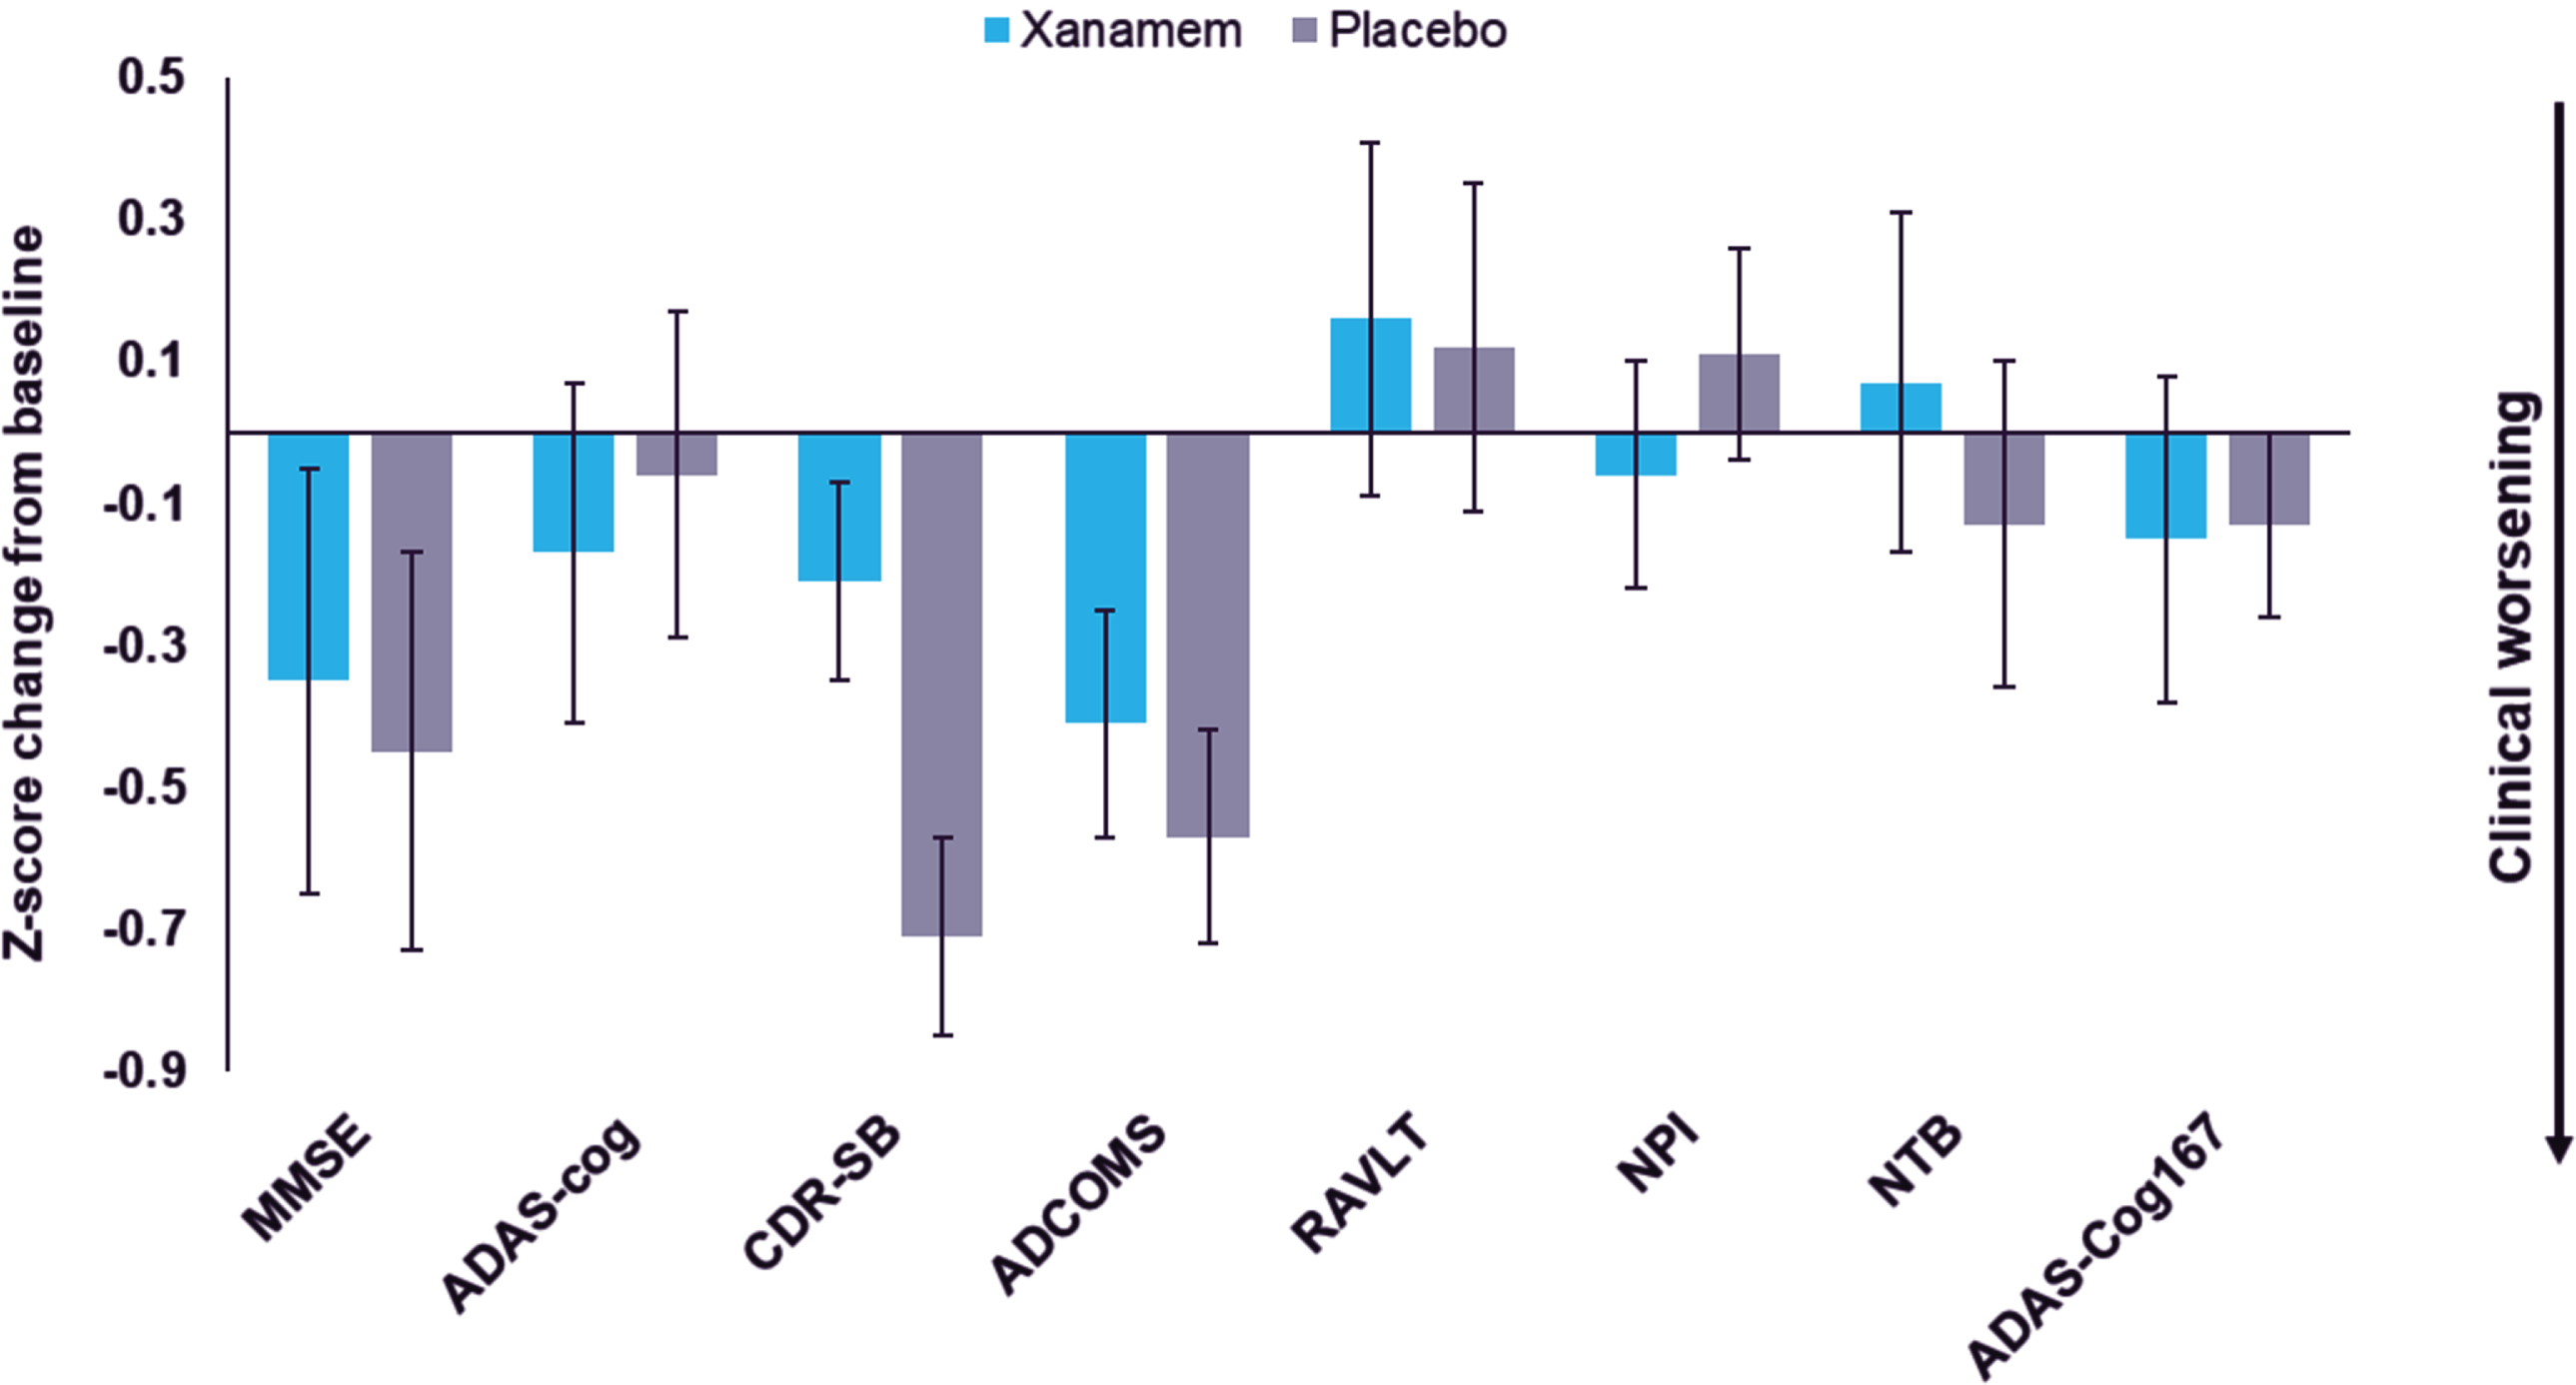 Xanamem versus placebo Z-score change from baseline score in the pTau181 >  median (“H”) subgroup for all pre specified clinical endpoints. Z-score change from baseline to Week 12 scores (Least Squares mean ± Standard Error) on the Mini-Mental Status Examination (MMSE), AD Assessment Scales – Cognitive subscale (ADAS-Cog), Clinical Dementia Rating Scale – Sum of Boxes (CDR-SB), AD COMposite Score (ADCOMS), Rey Auditory Verbal Learning Test (RAVLT), Neuropsychiatric Inventory (NPI), Neuropsychological Test Battery (NTB), and ADAS-Cog167 (composite of ADAS-Cog items 1, 6, and 7).